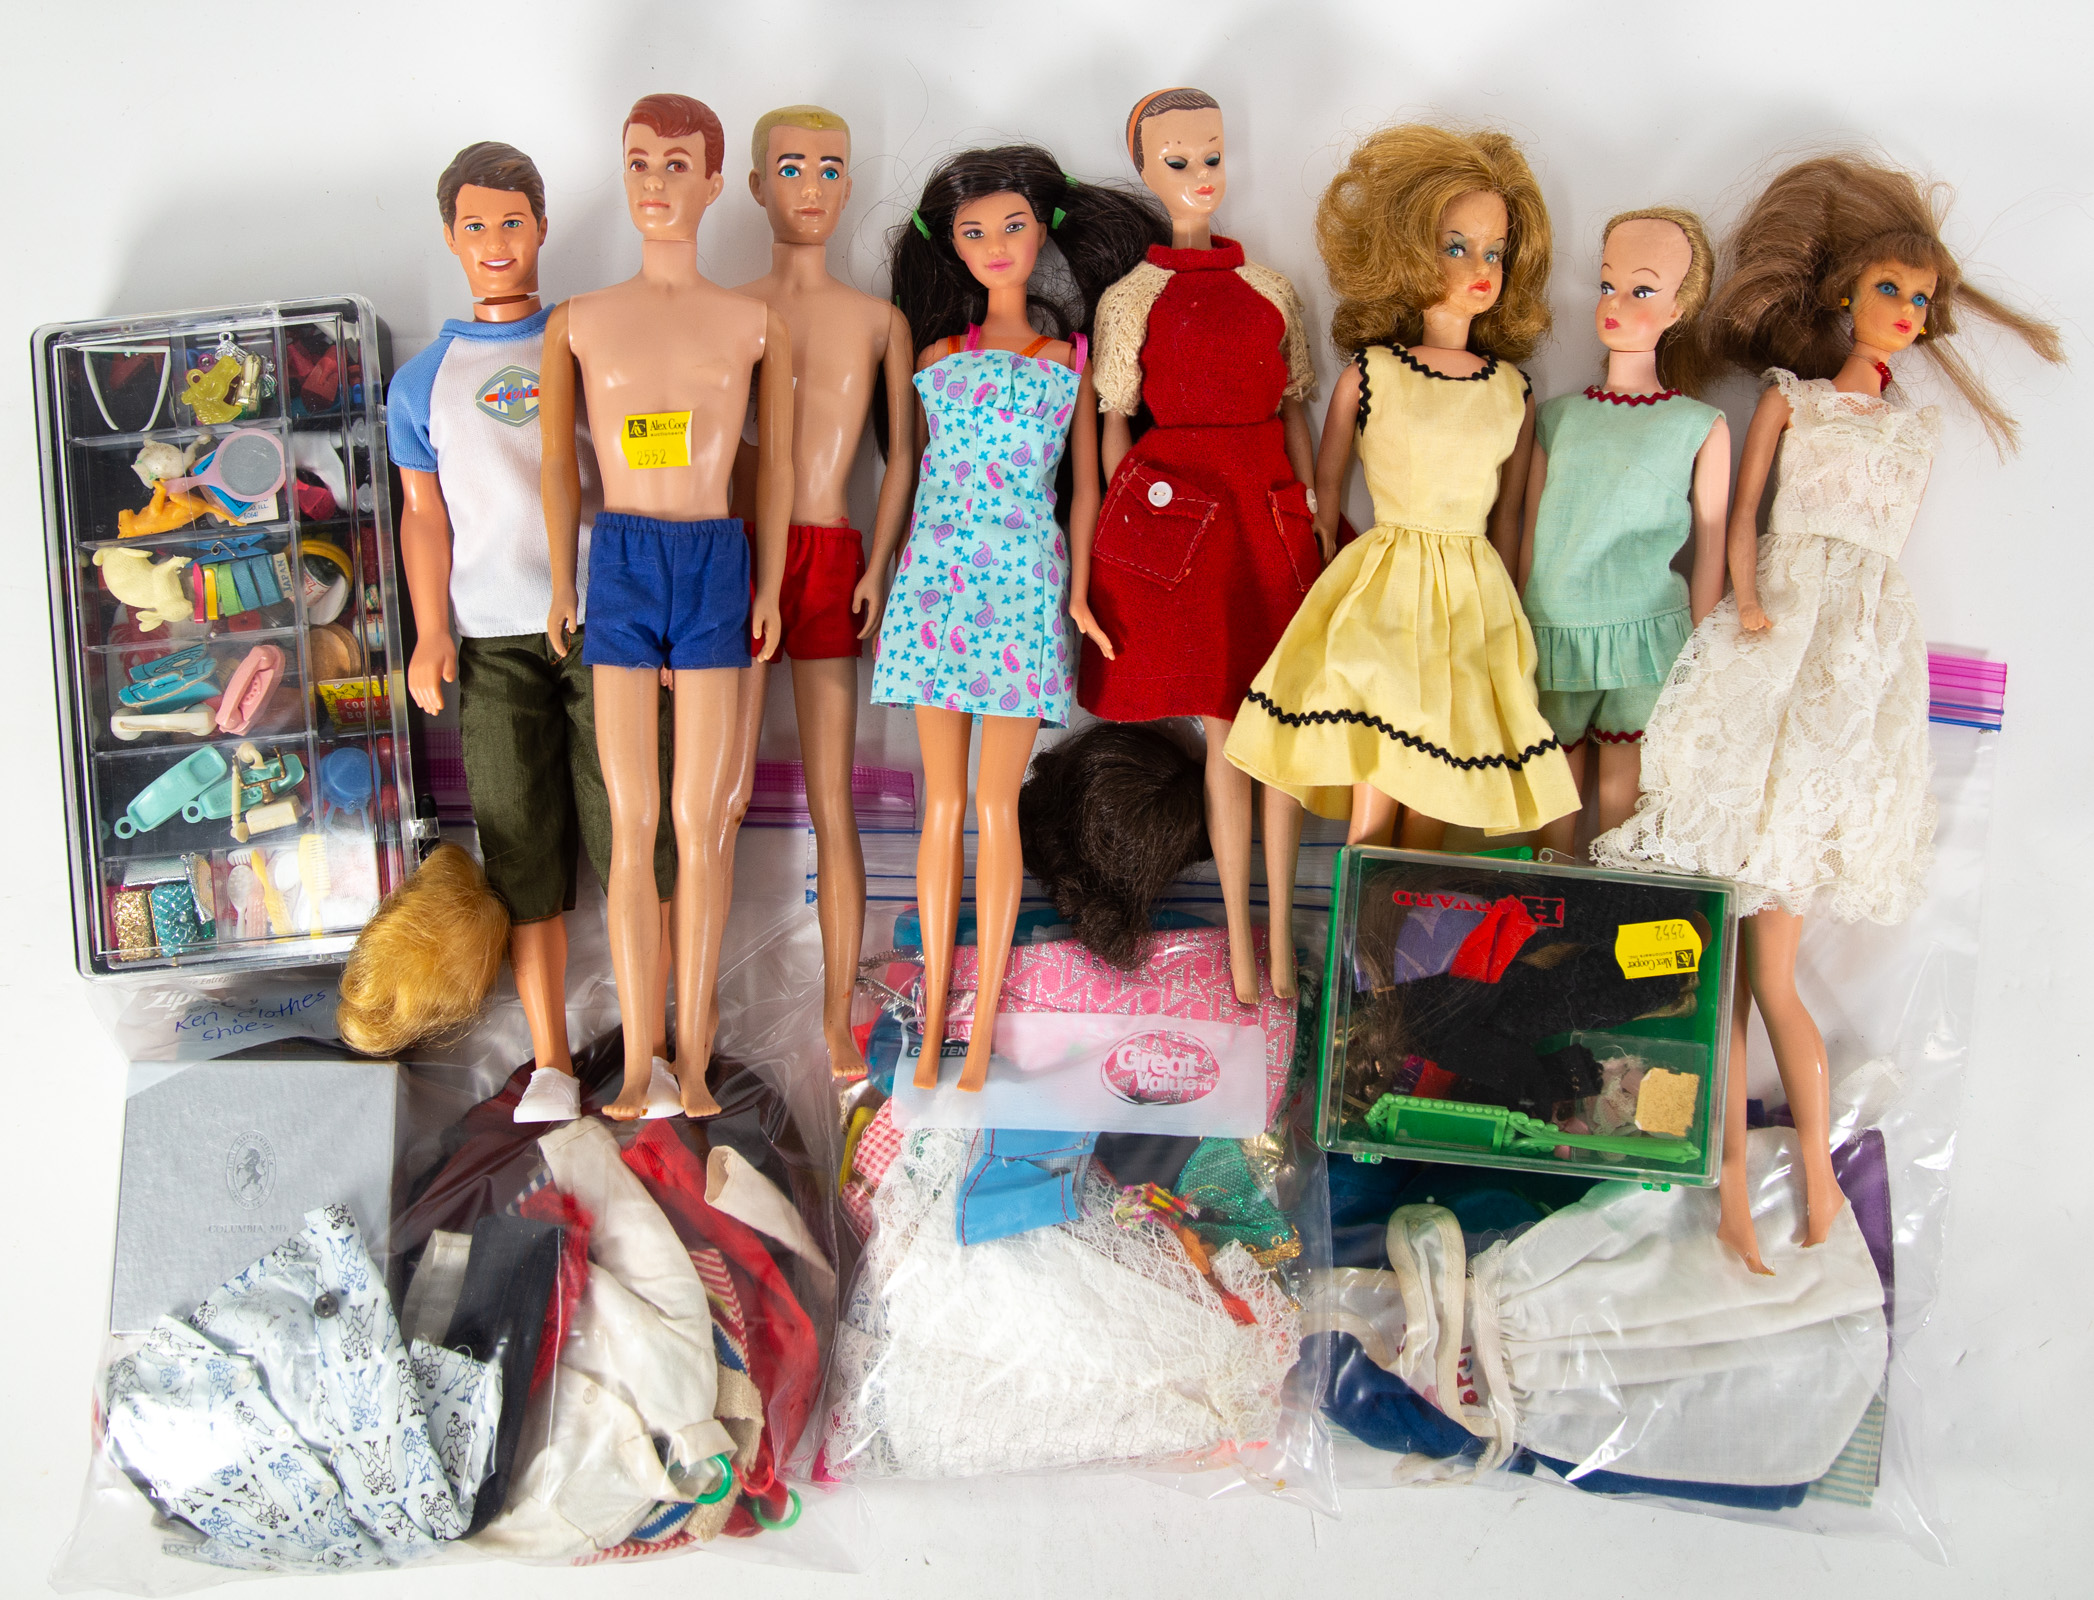 LARGE GROUPING OF KEN & POSSIBLY BARBIE